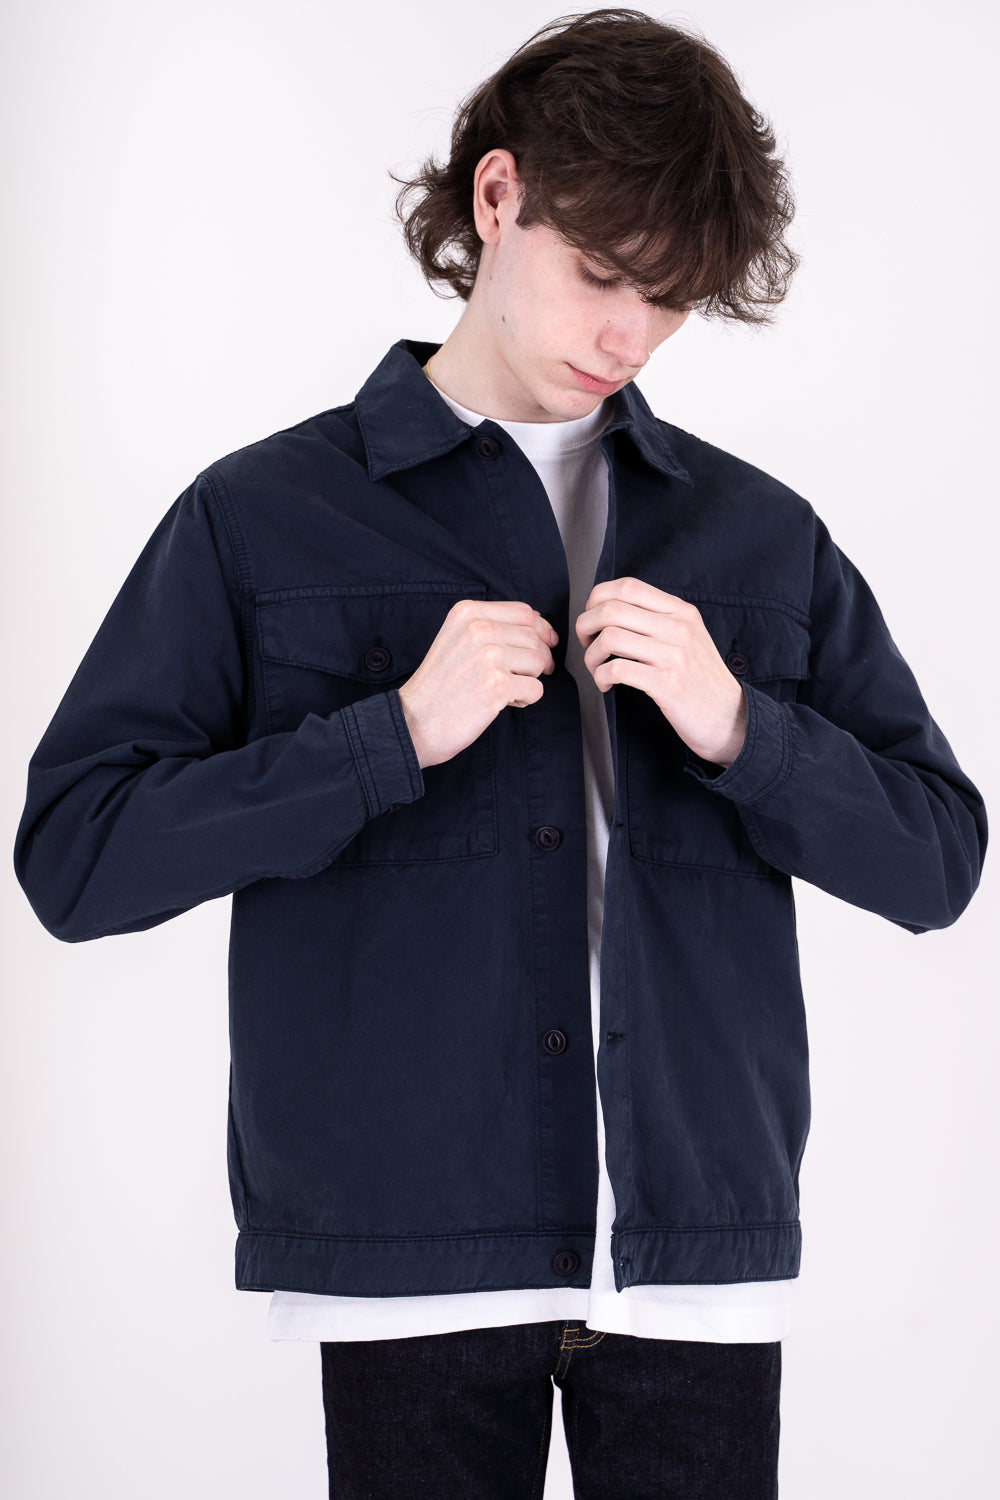 Kevin Overshirt in Navy